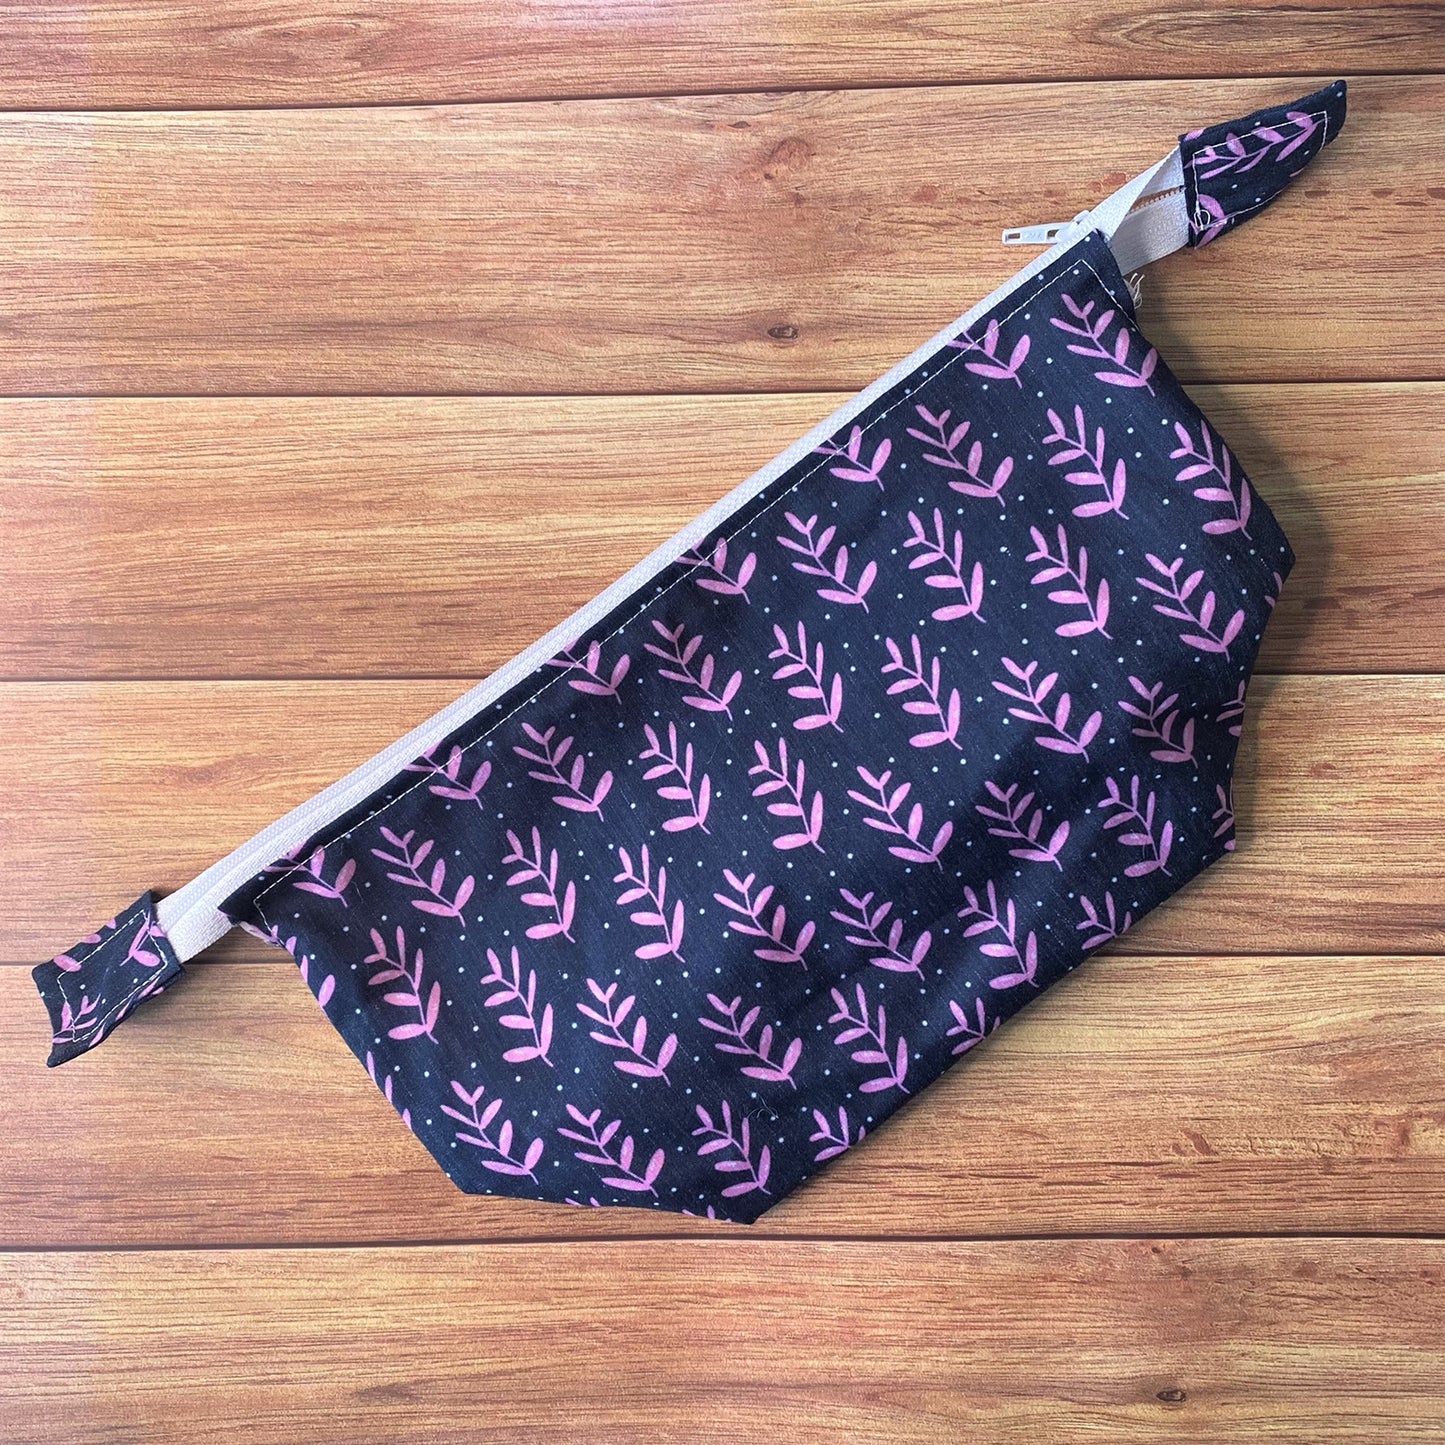 Dark blue patterned makeup bag for cosmetic storage on a wooden background